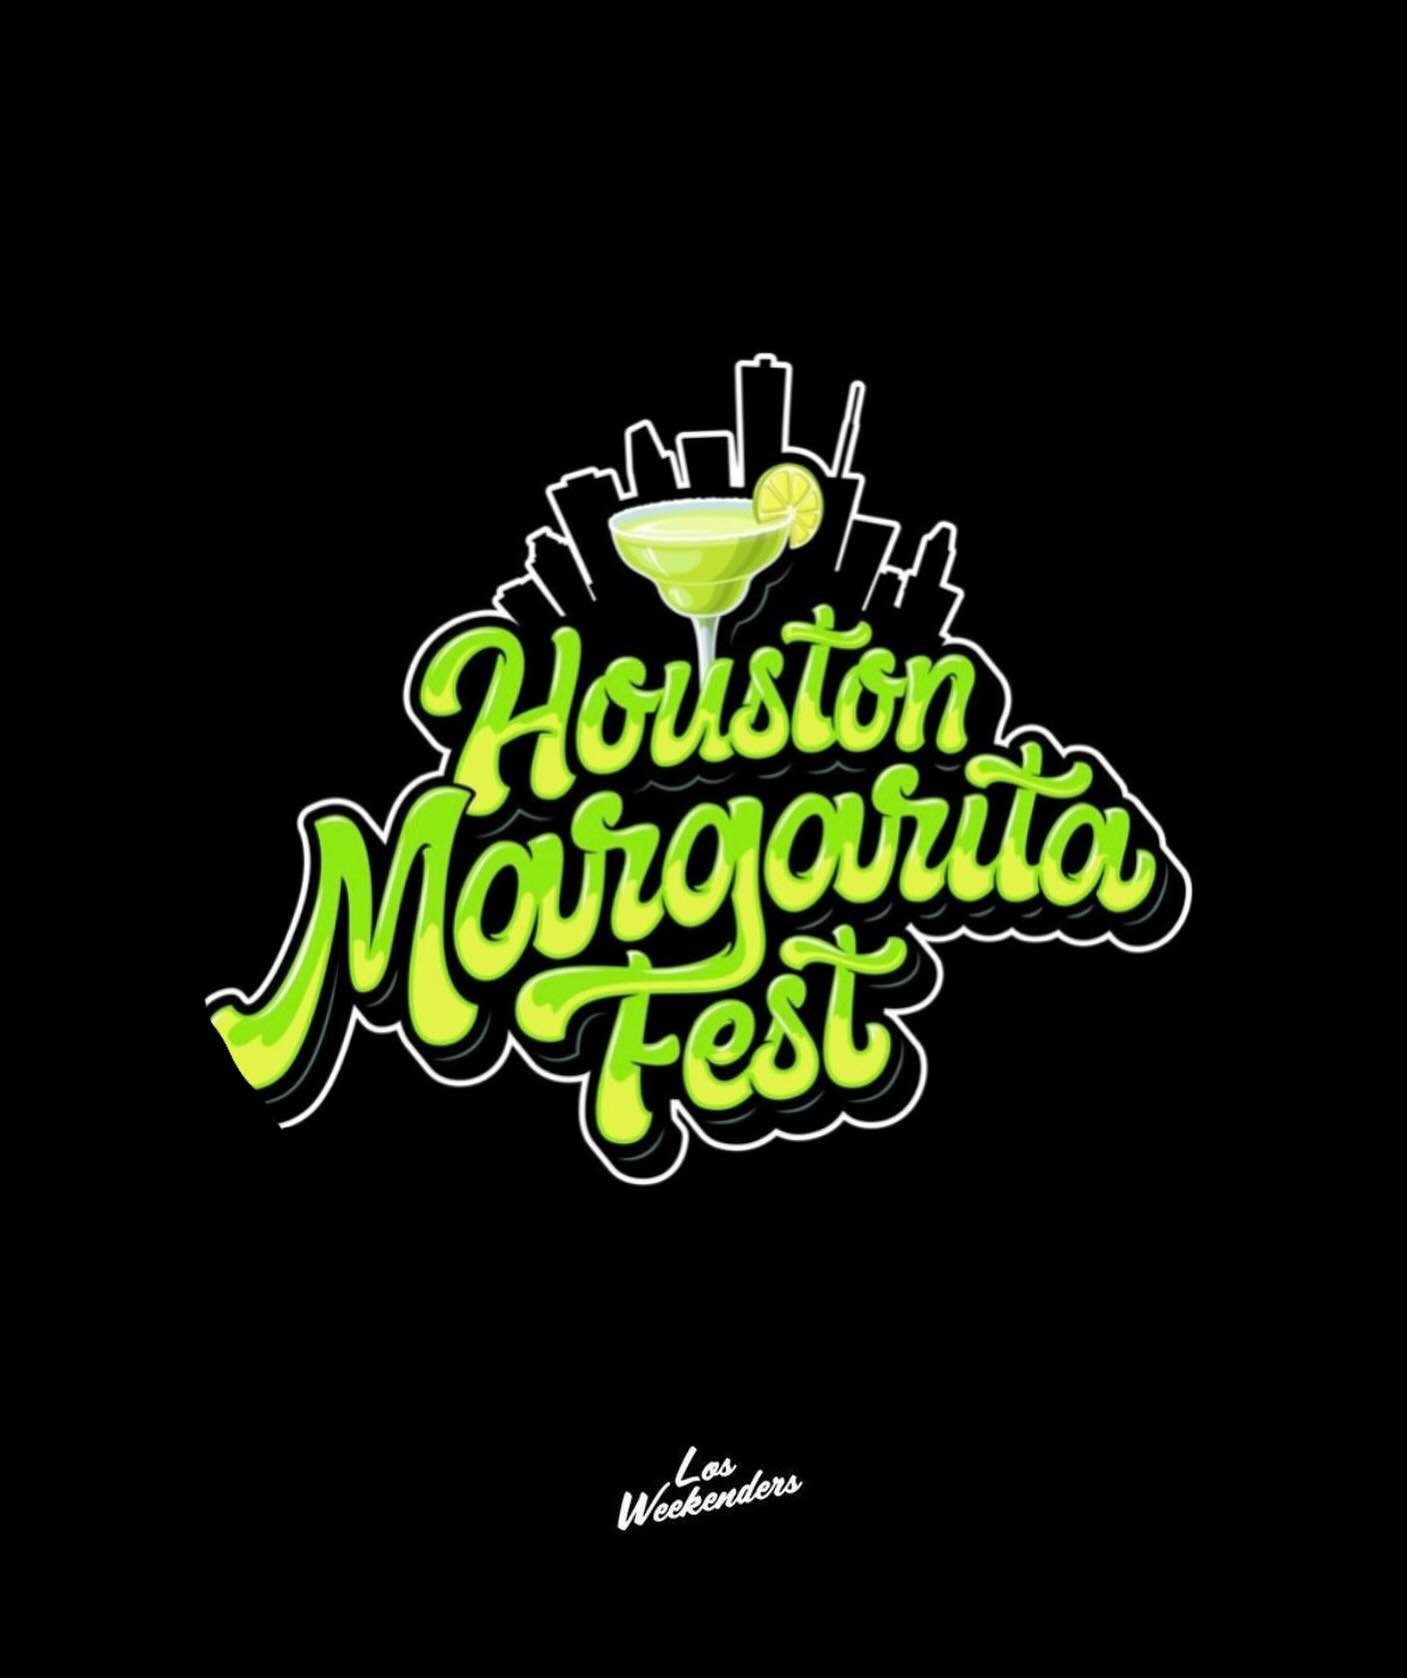 We&rsquo;ll be out at @houstonmargaritafestival at Water Works Park near downtown from 2p-10p today! Stop by and see us!
-
#losweekenders #margme